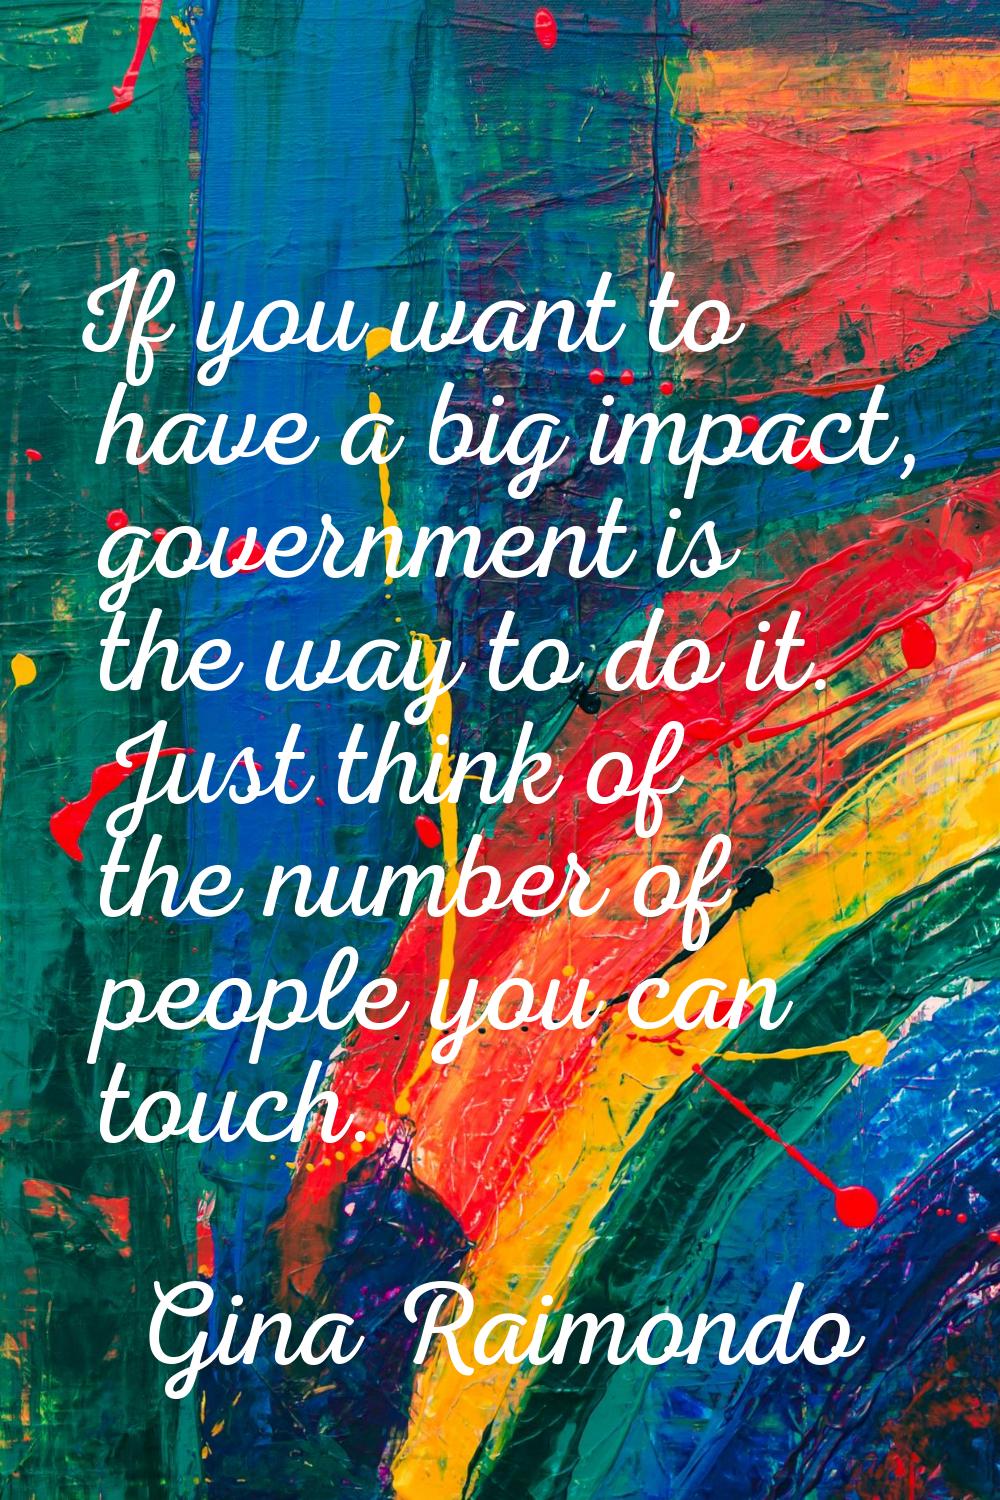 If you want to have a big impact, government is the way to do it. Just think of the number of peopl